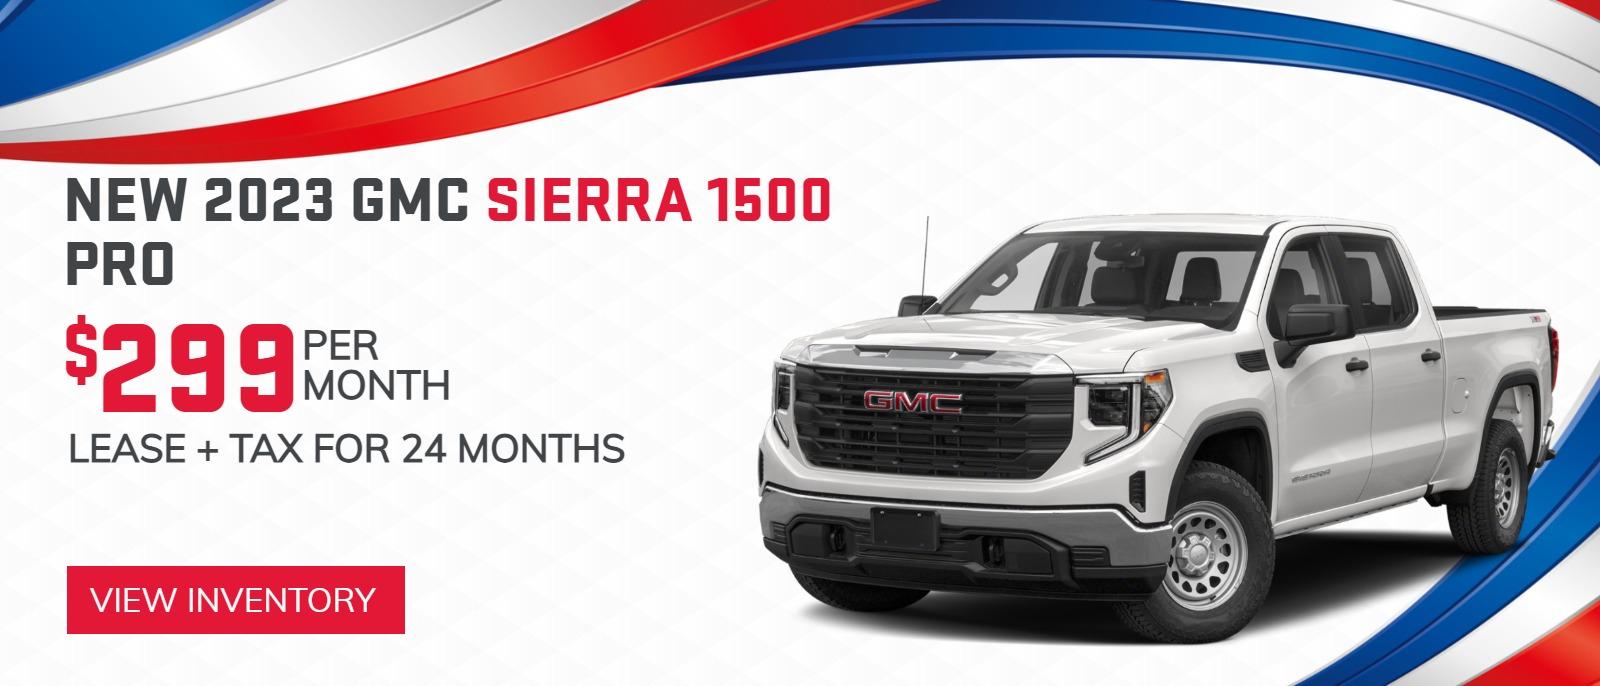 New 2024 GMC Sierra 1500 Pro
$299/mo.* Lease + Tax for 24 Months